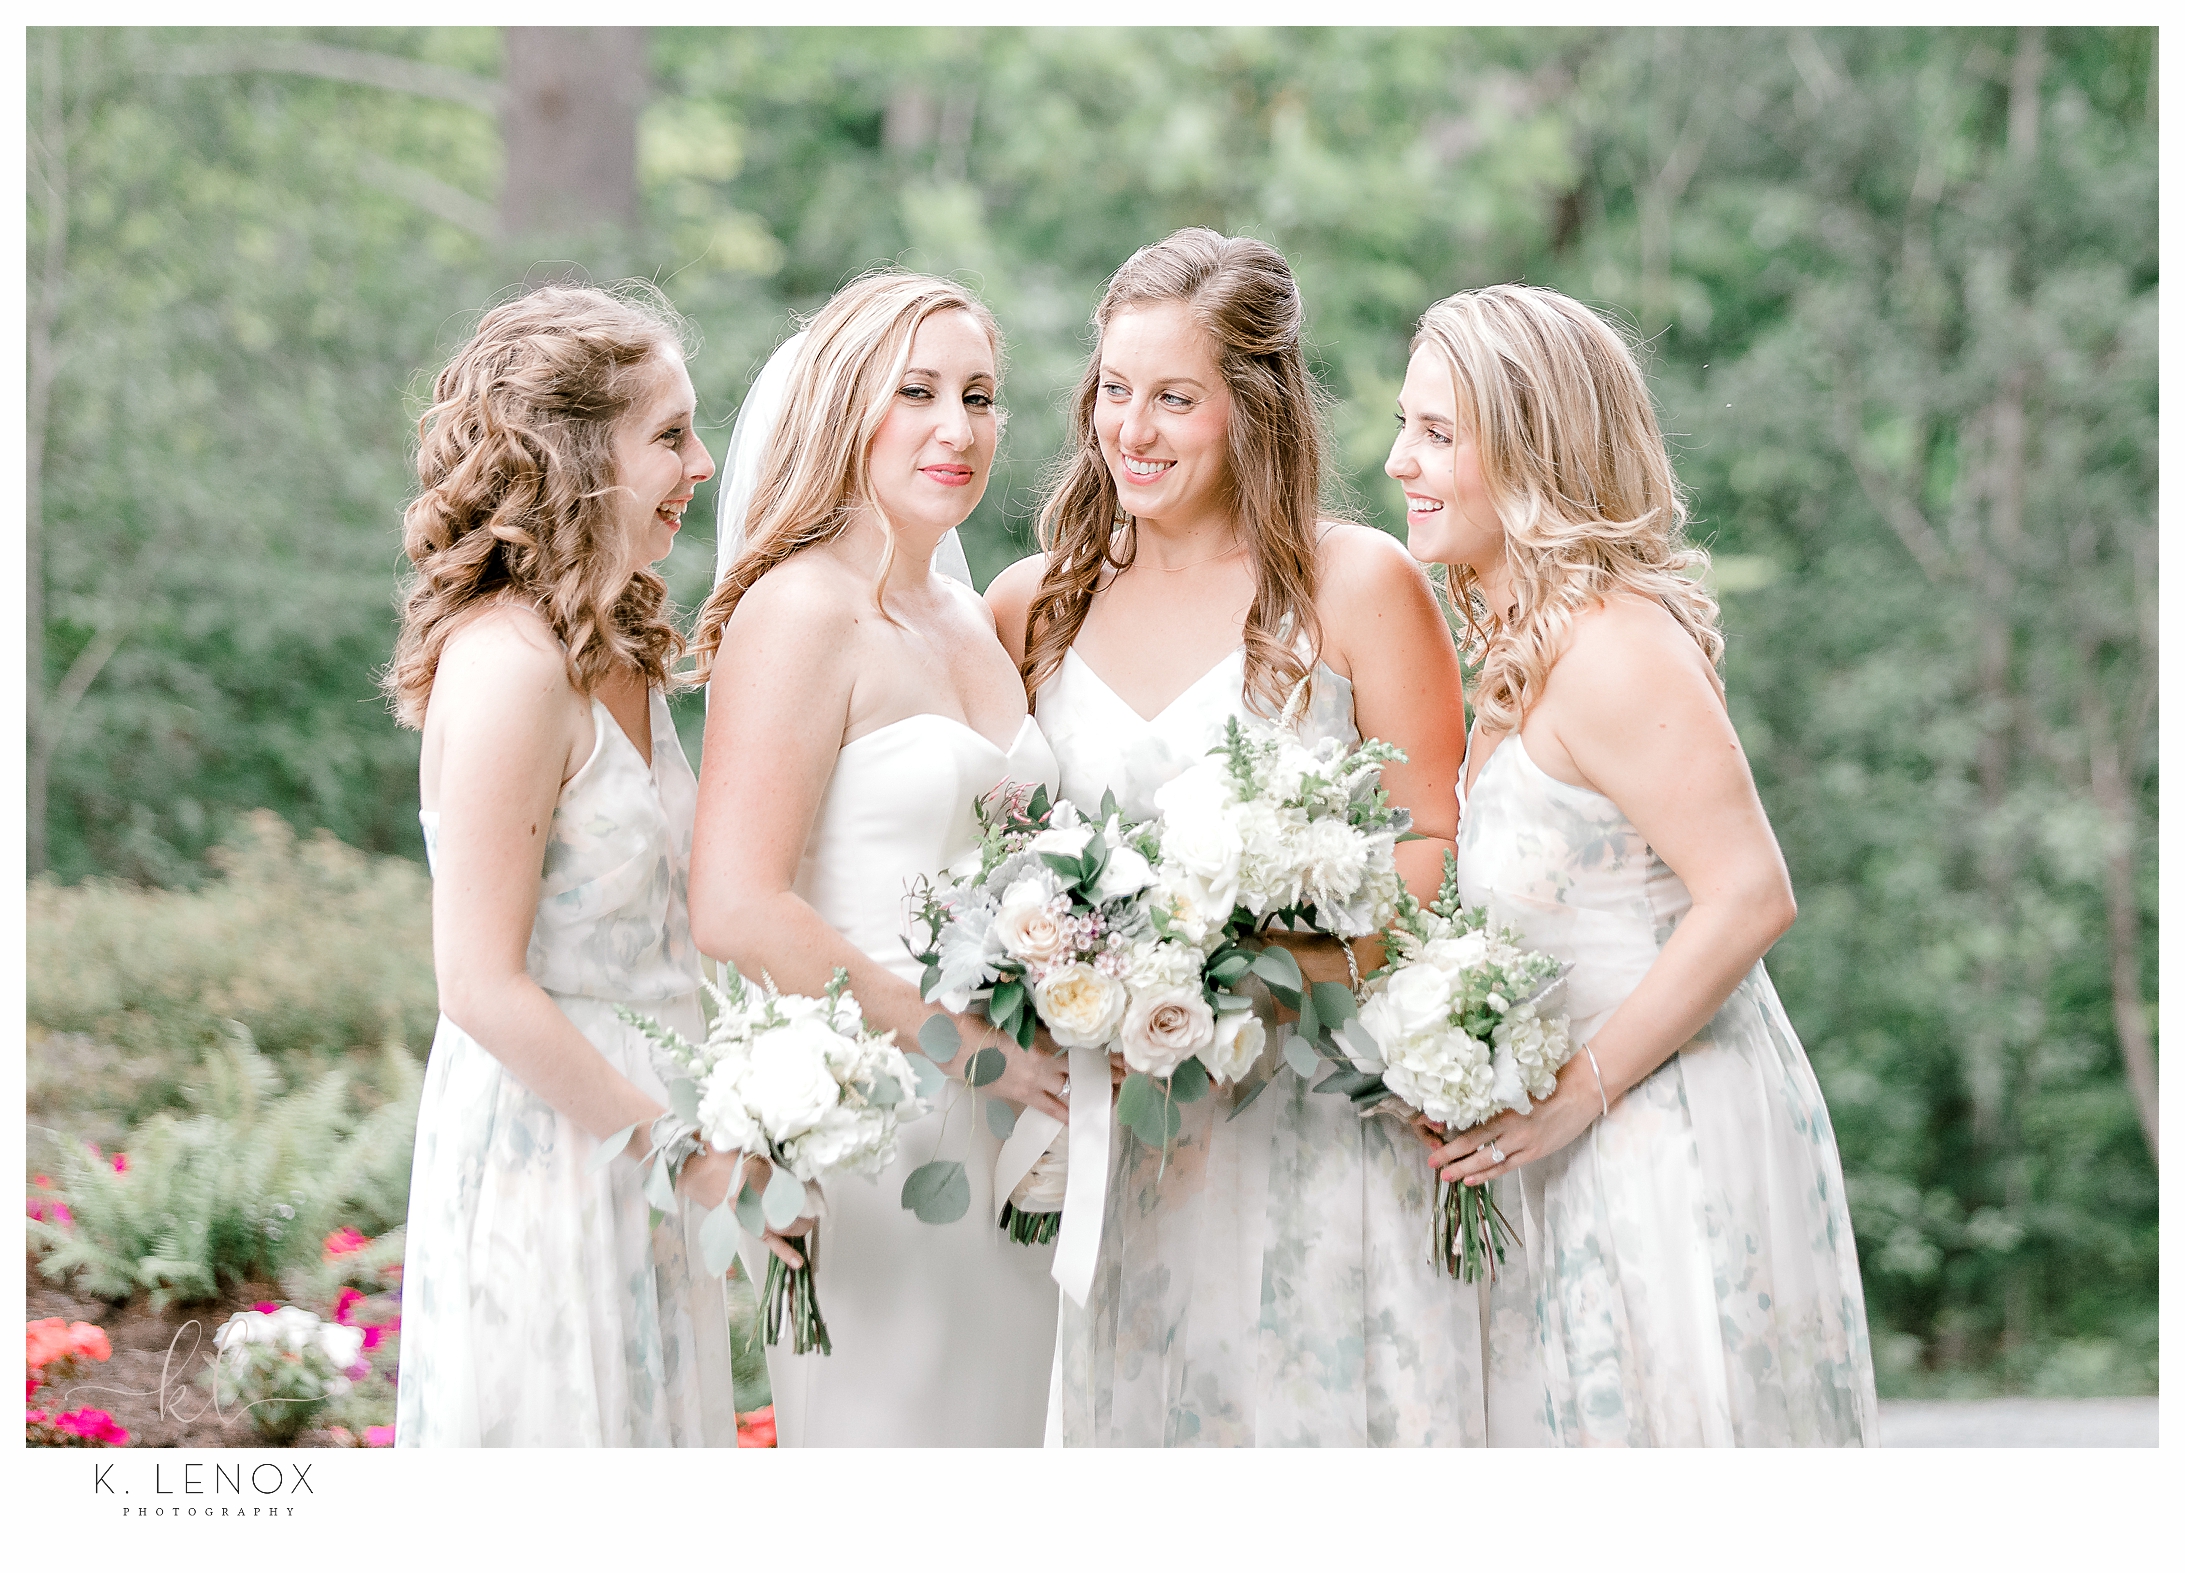 Candid photo of a bride and her bridesmaids by K. Lenox Photography. 